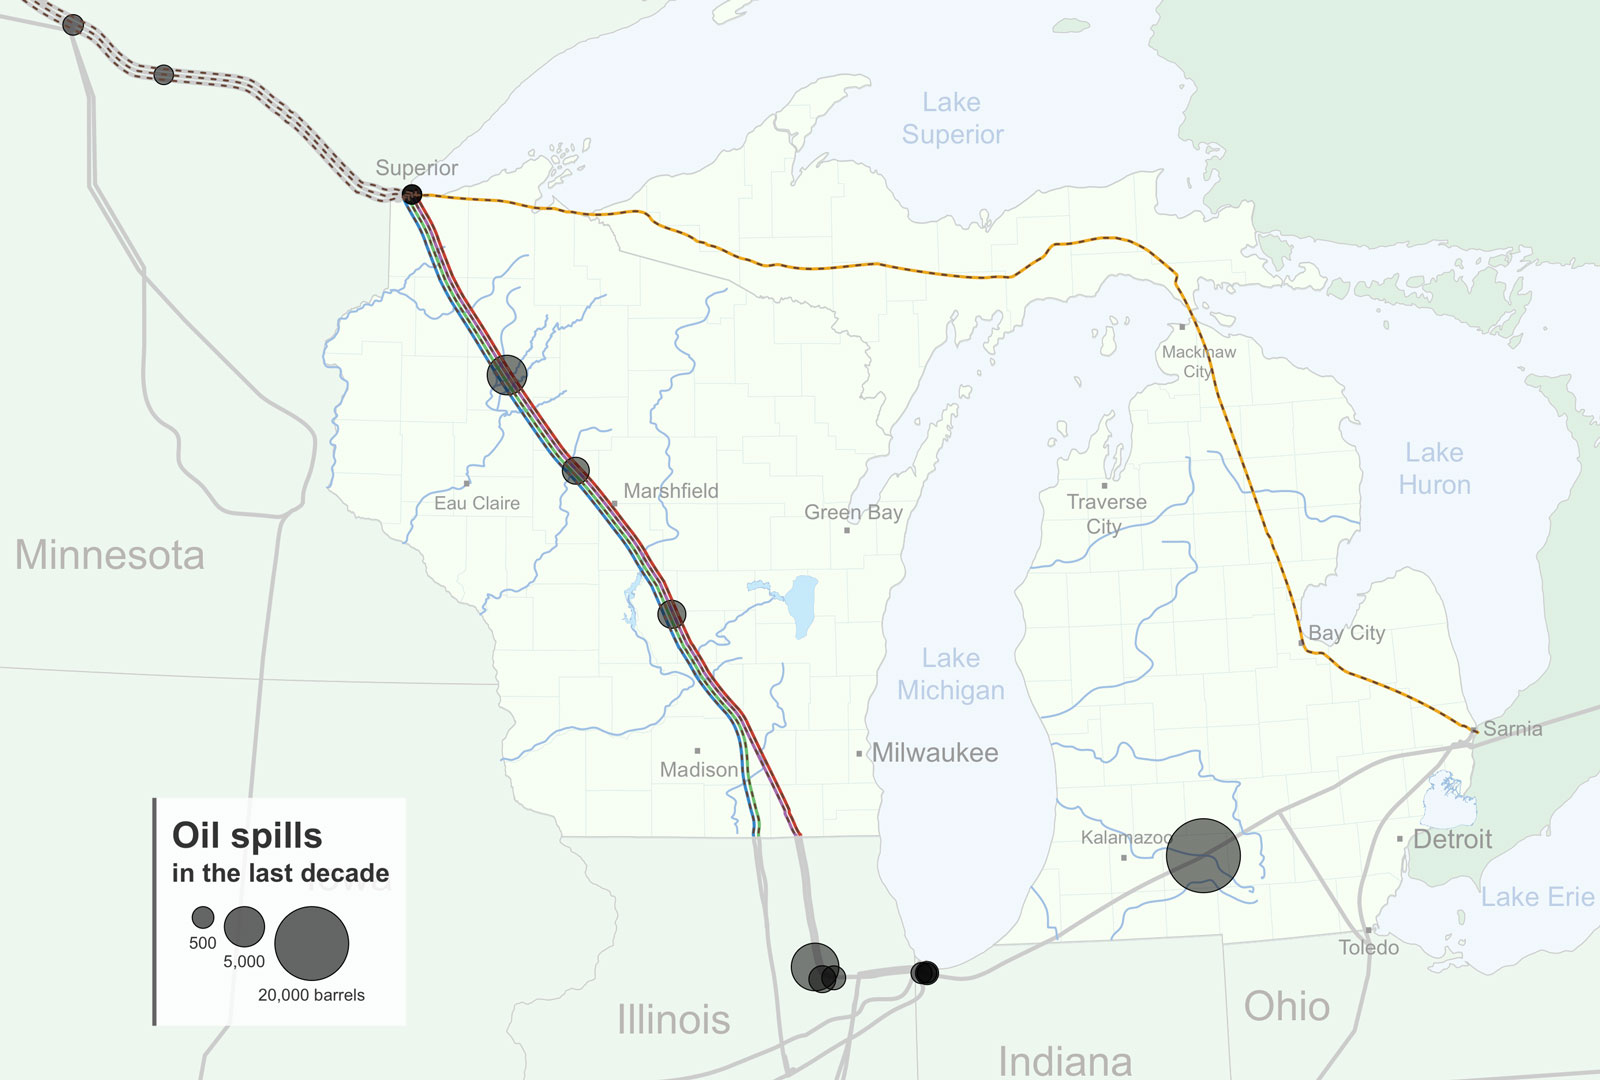 map of Enbridge oil pipelines and spills in the Great Lakes